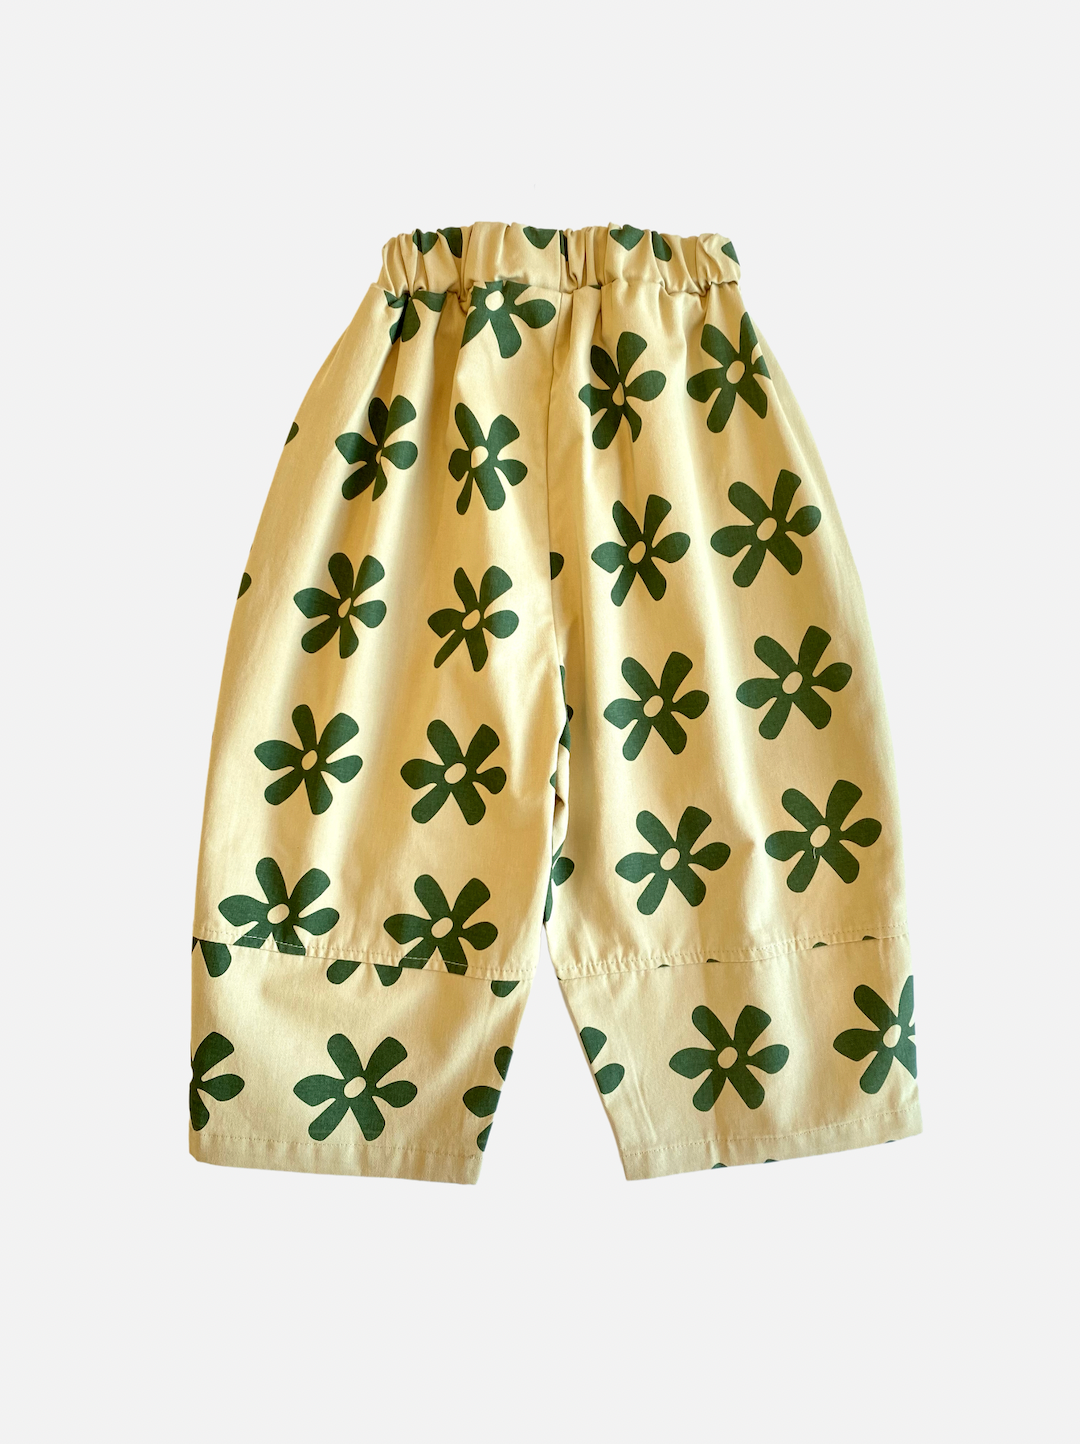 A pair of kids' pants in cream with green flowers